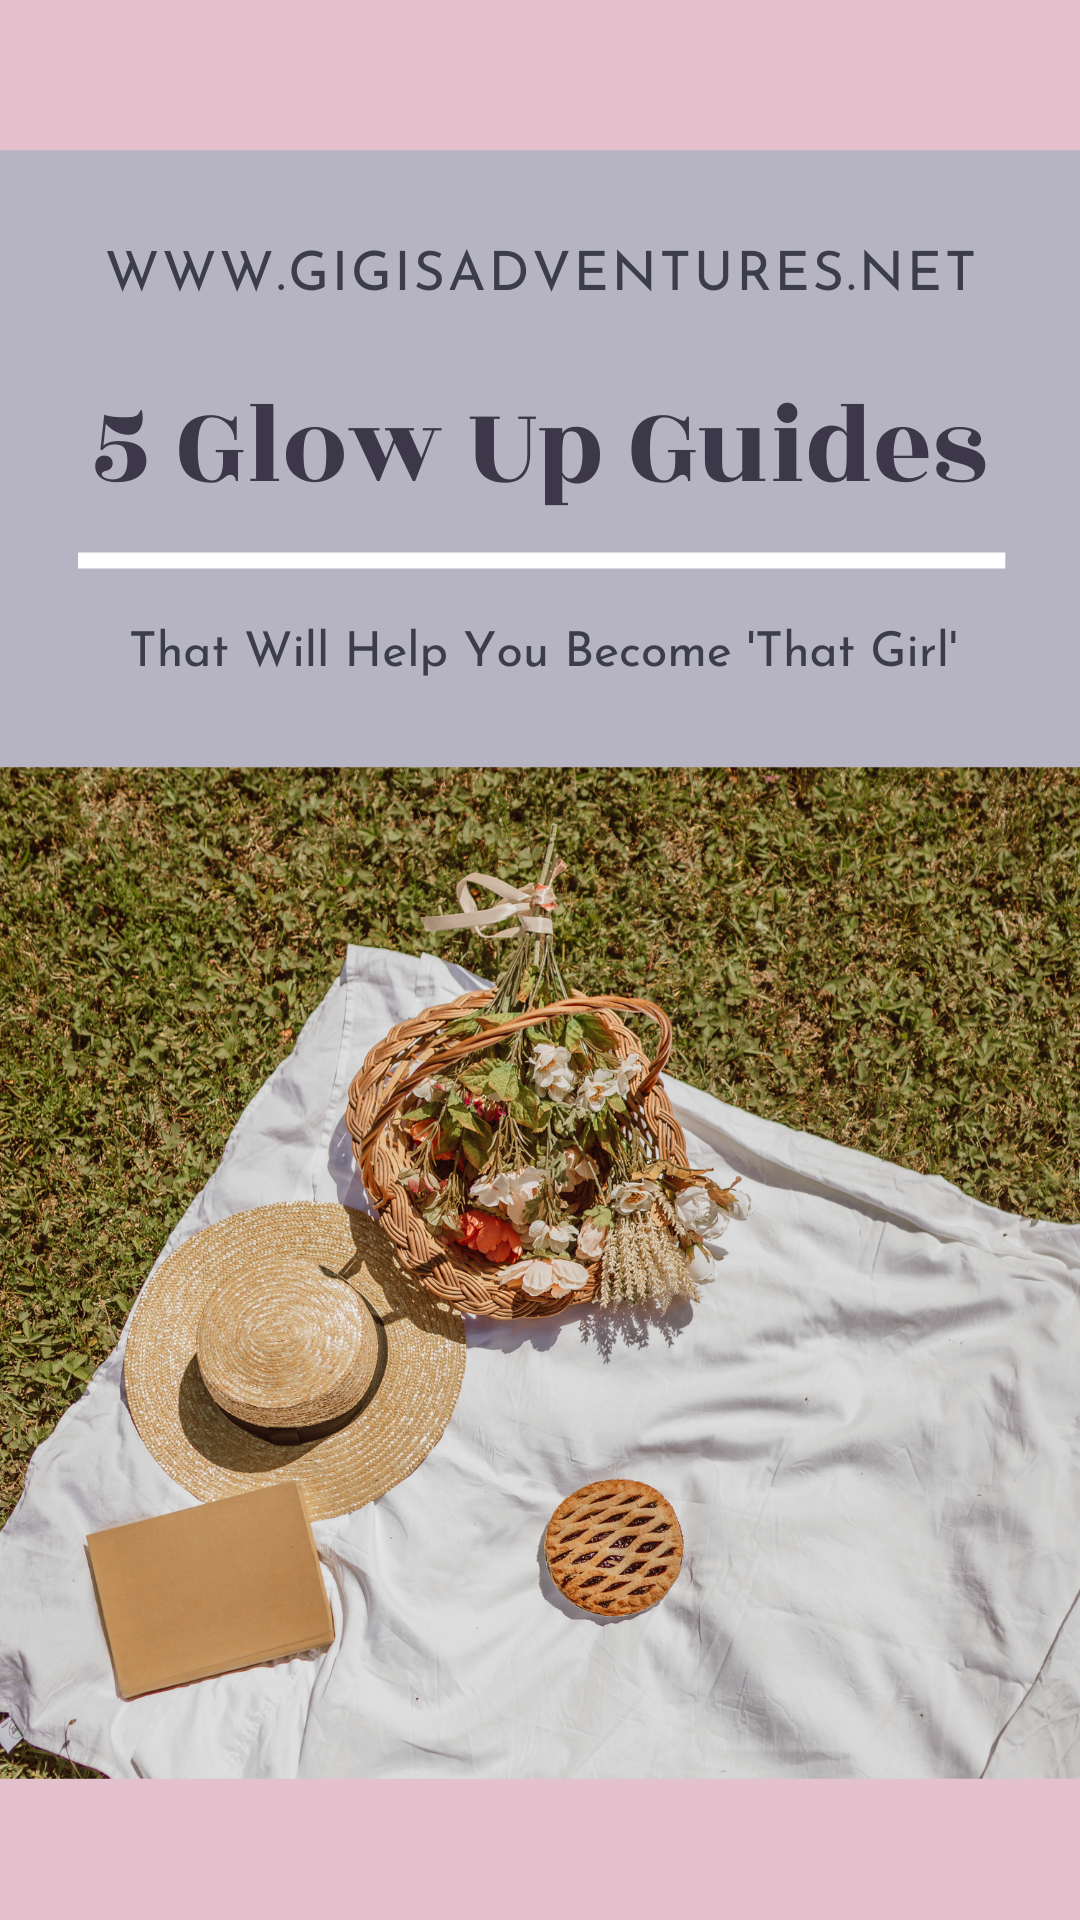 5 Glow Up Guides That Will Help You Become 'That Girl'